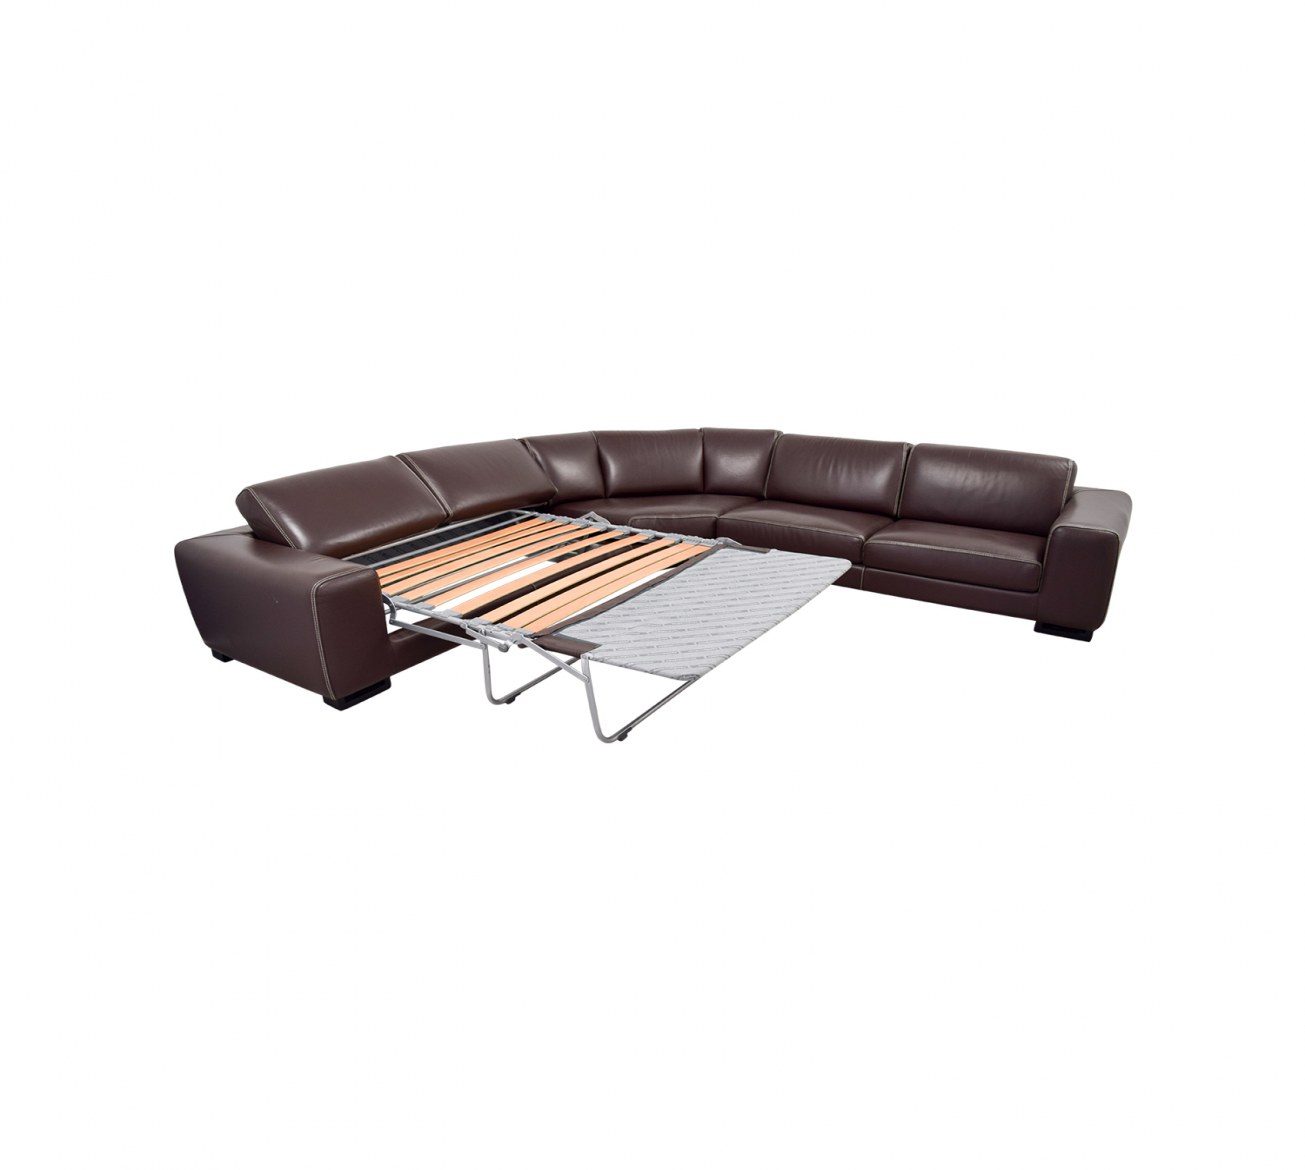 roche bobois sofas leather sofa bed sectional amazing mallory 2piece sectional of roche bobois sofas